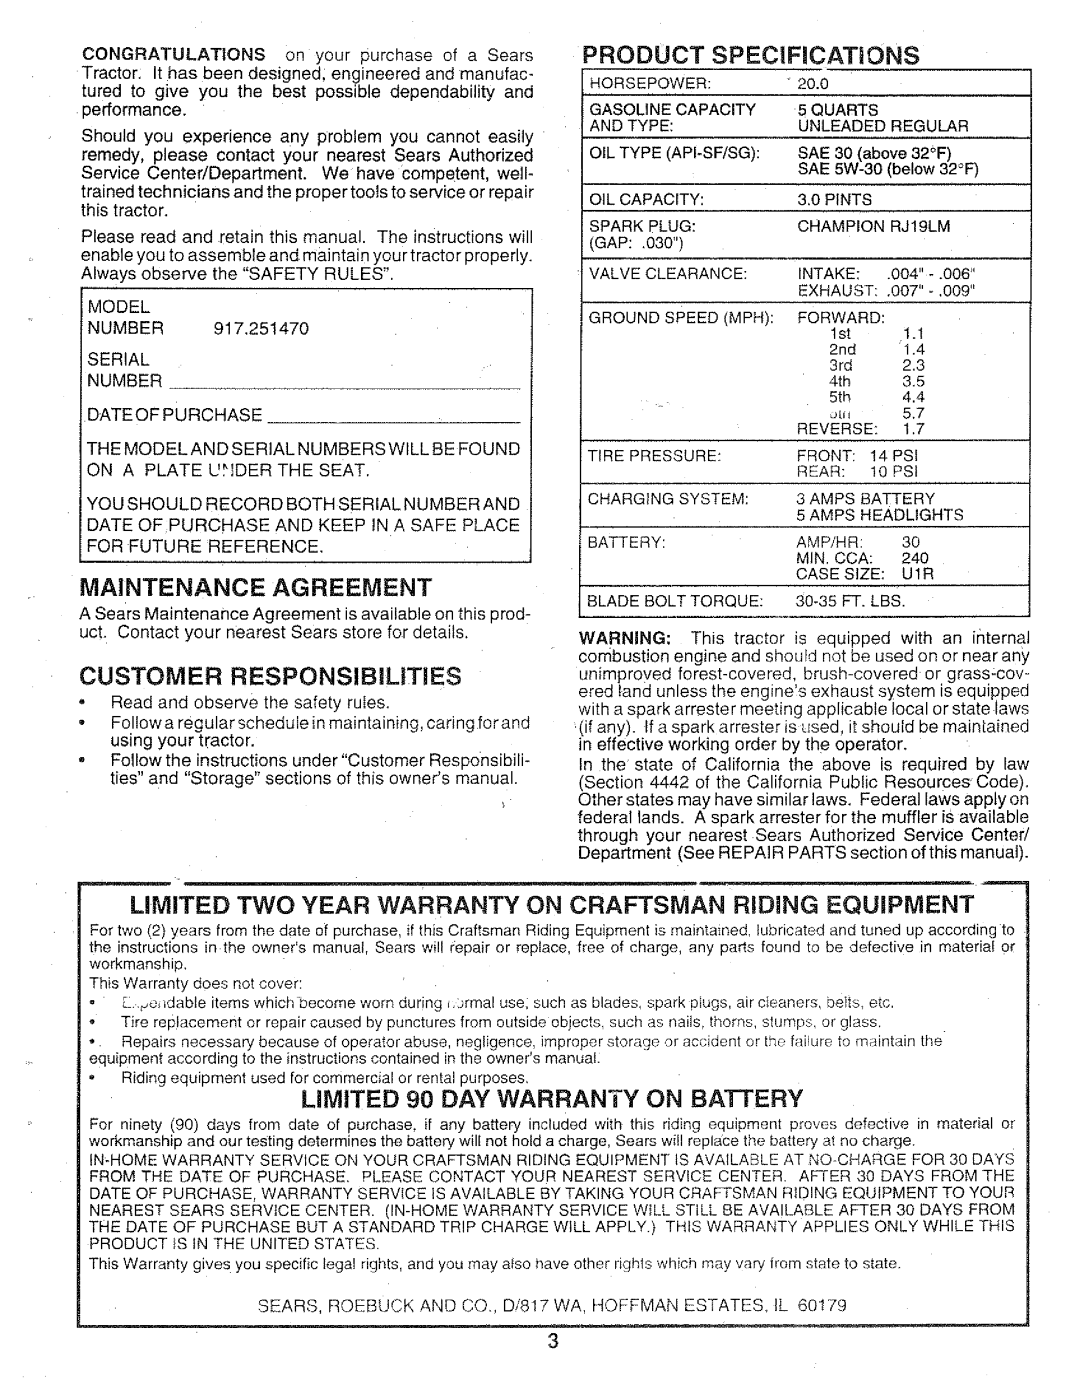 Sears 917.25147 owner manual Maintenance Agreement, Customer Responsibilities, PRODUCT SPECIFiCATiONS 